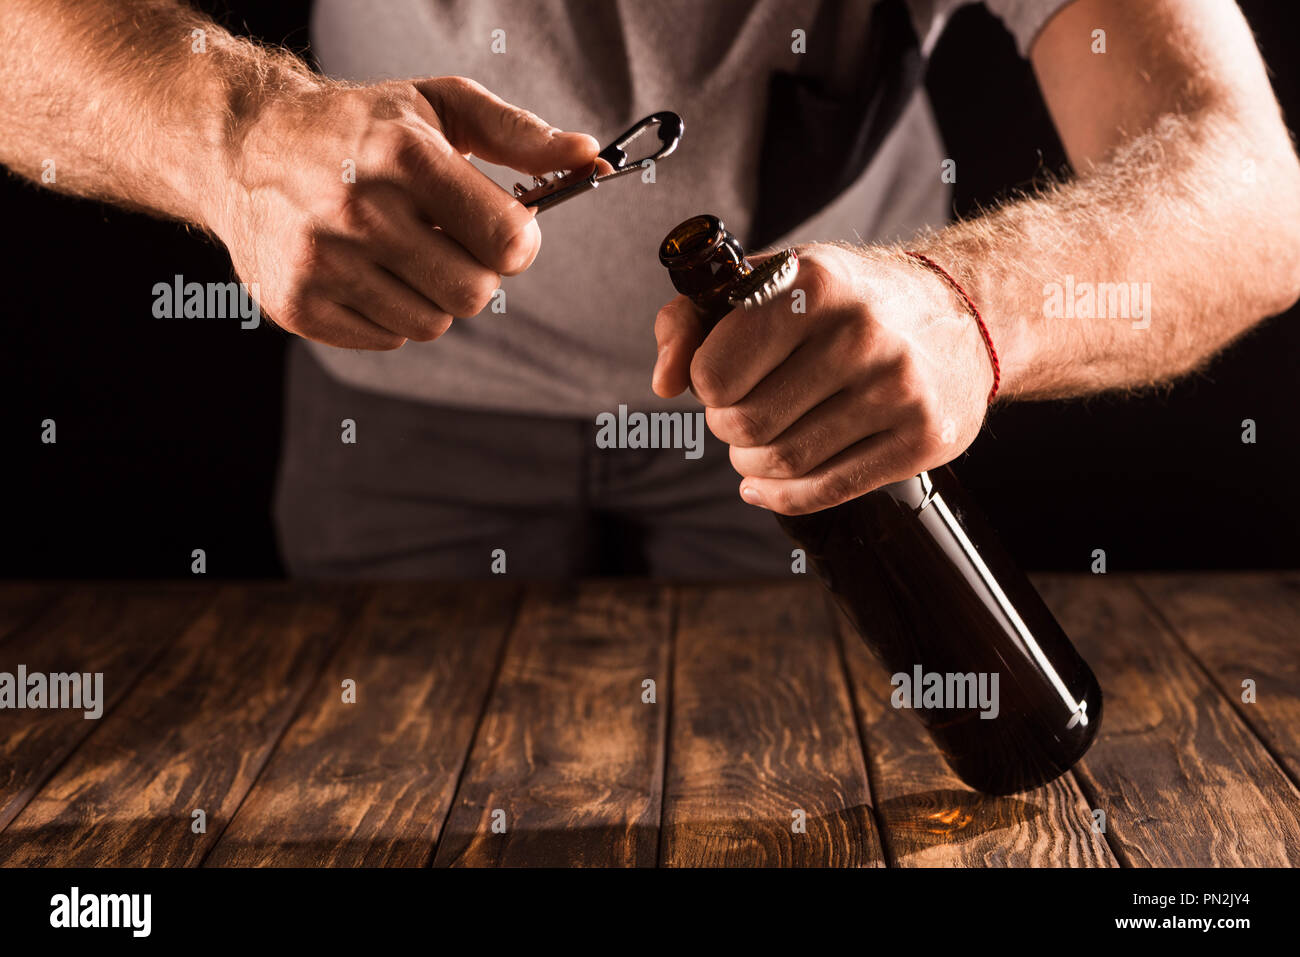 cropped image of man opening beer bottle by opener at wooden table Stock Photo